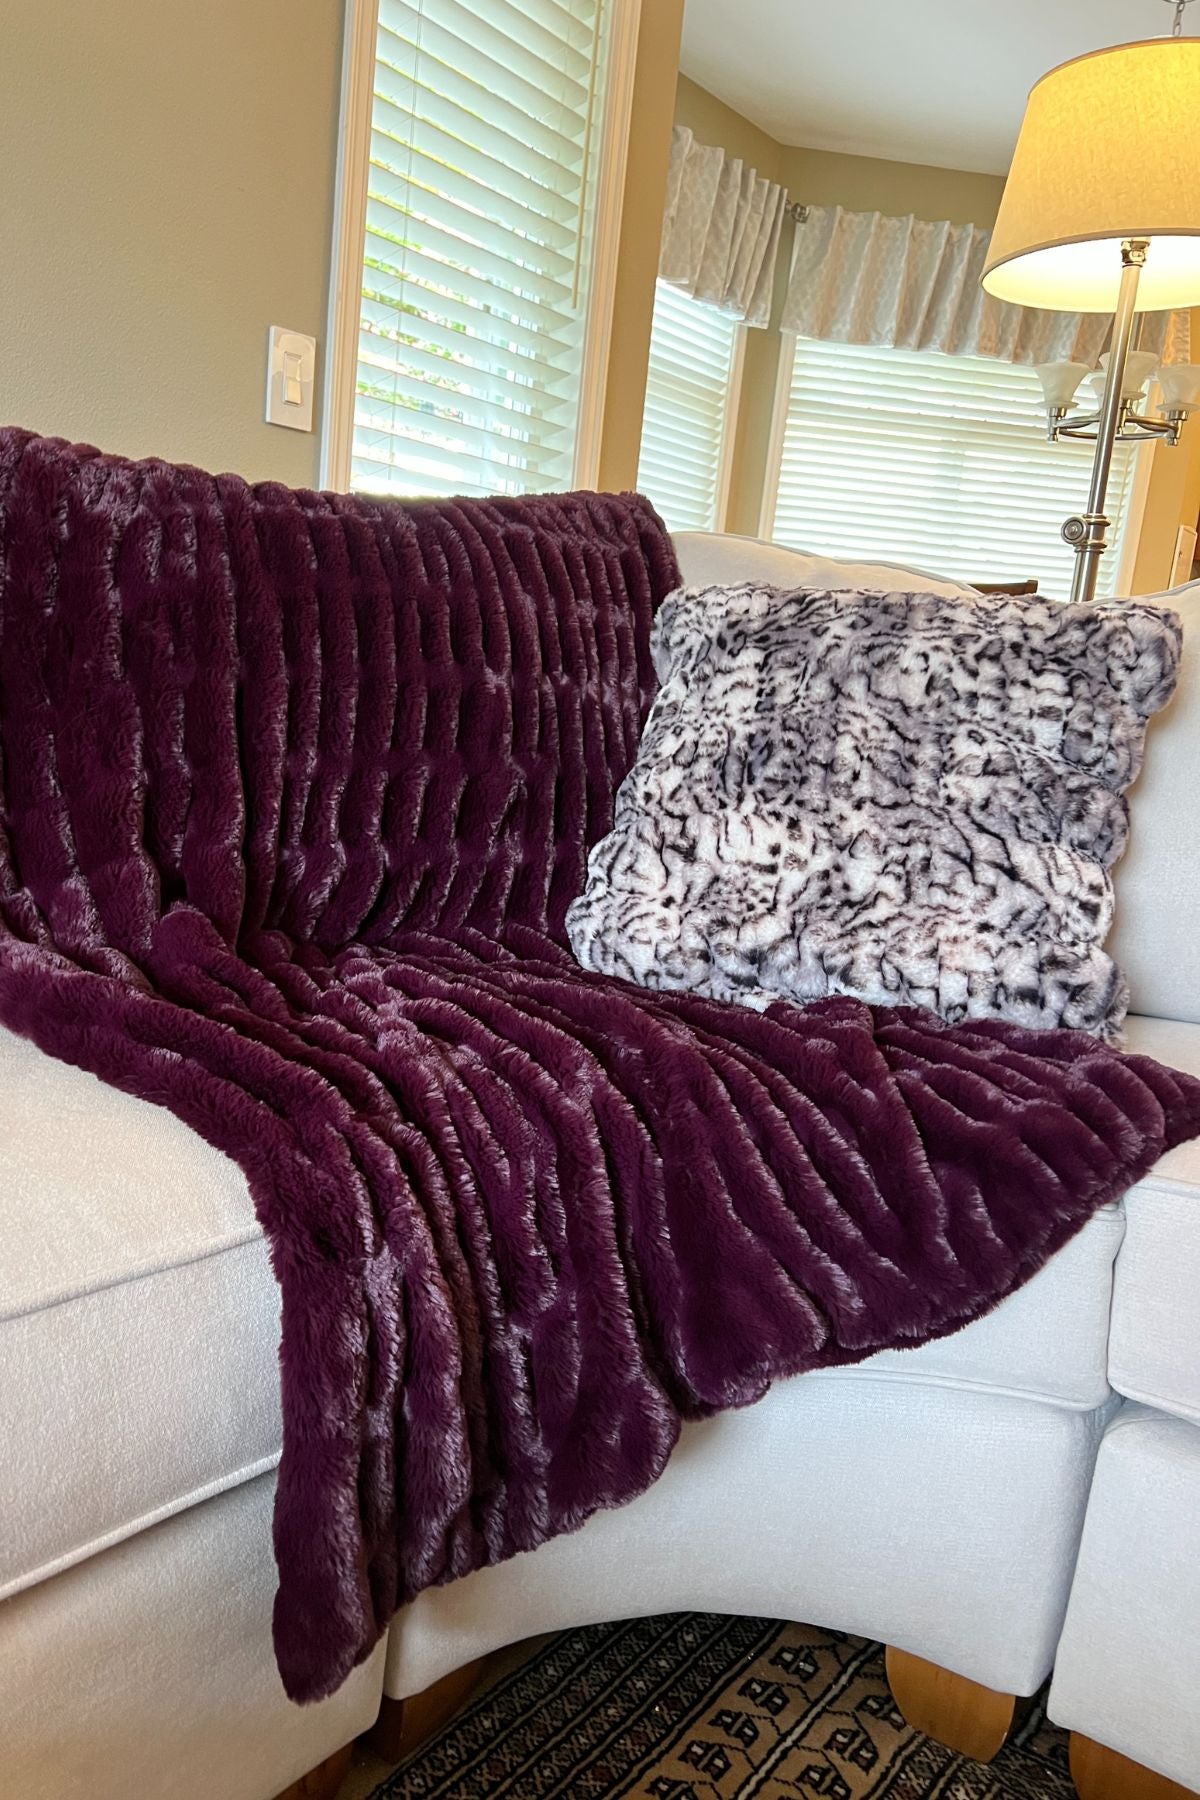 Draped over a chair is a Luxury Faux Fur Throw in Merlot with a Snow Leopard Pillow  From Royal Opulence Collection made by Pandemonium Seattle